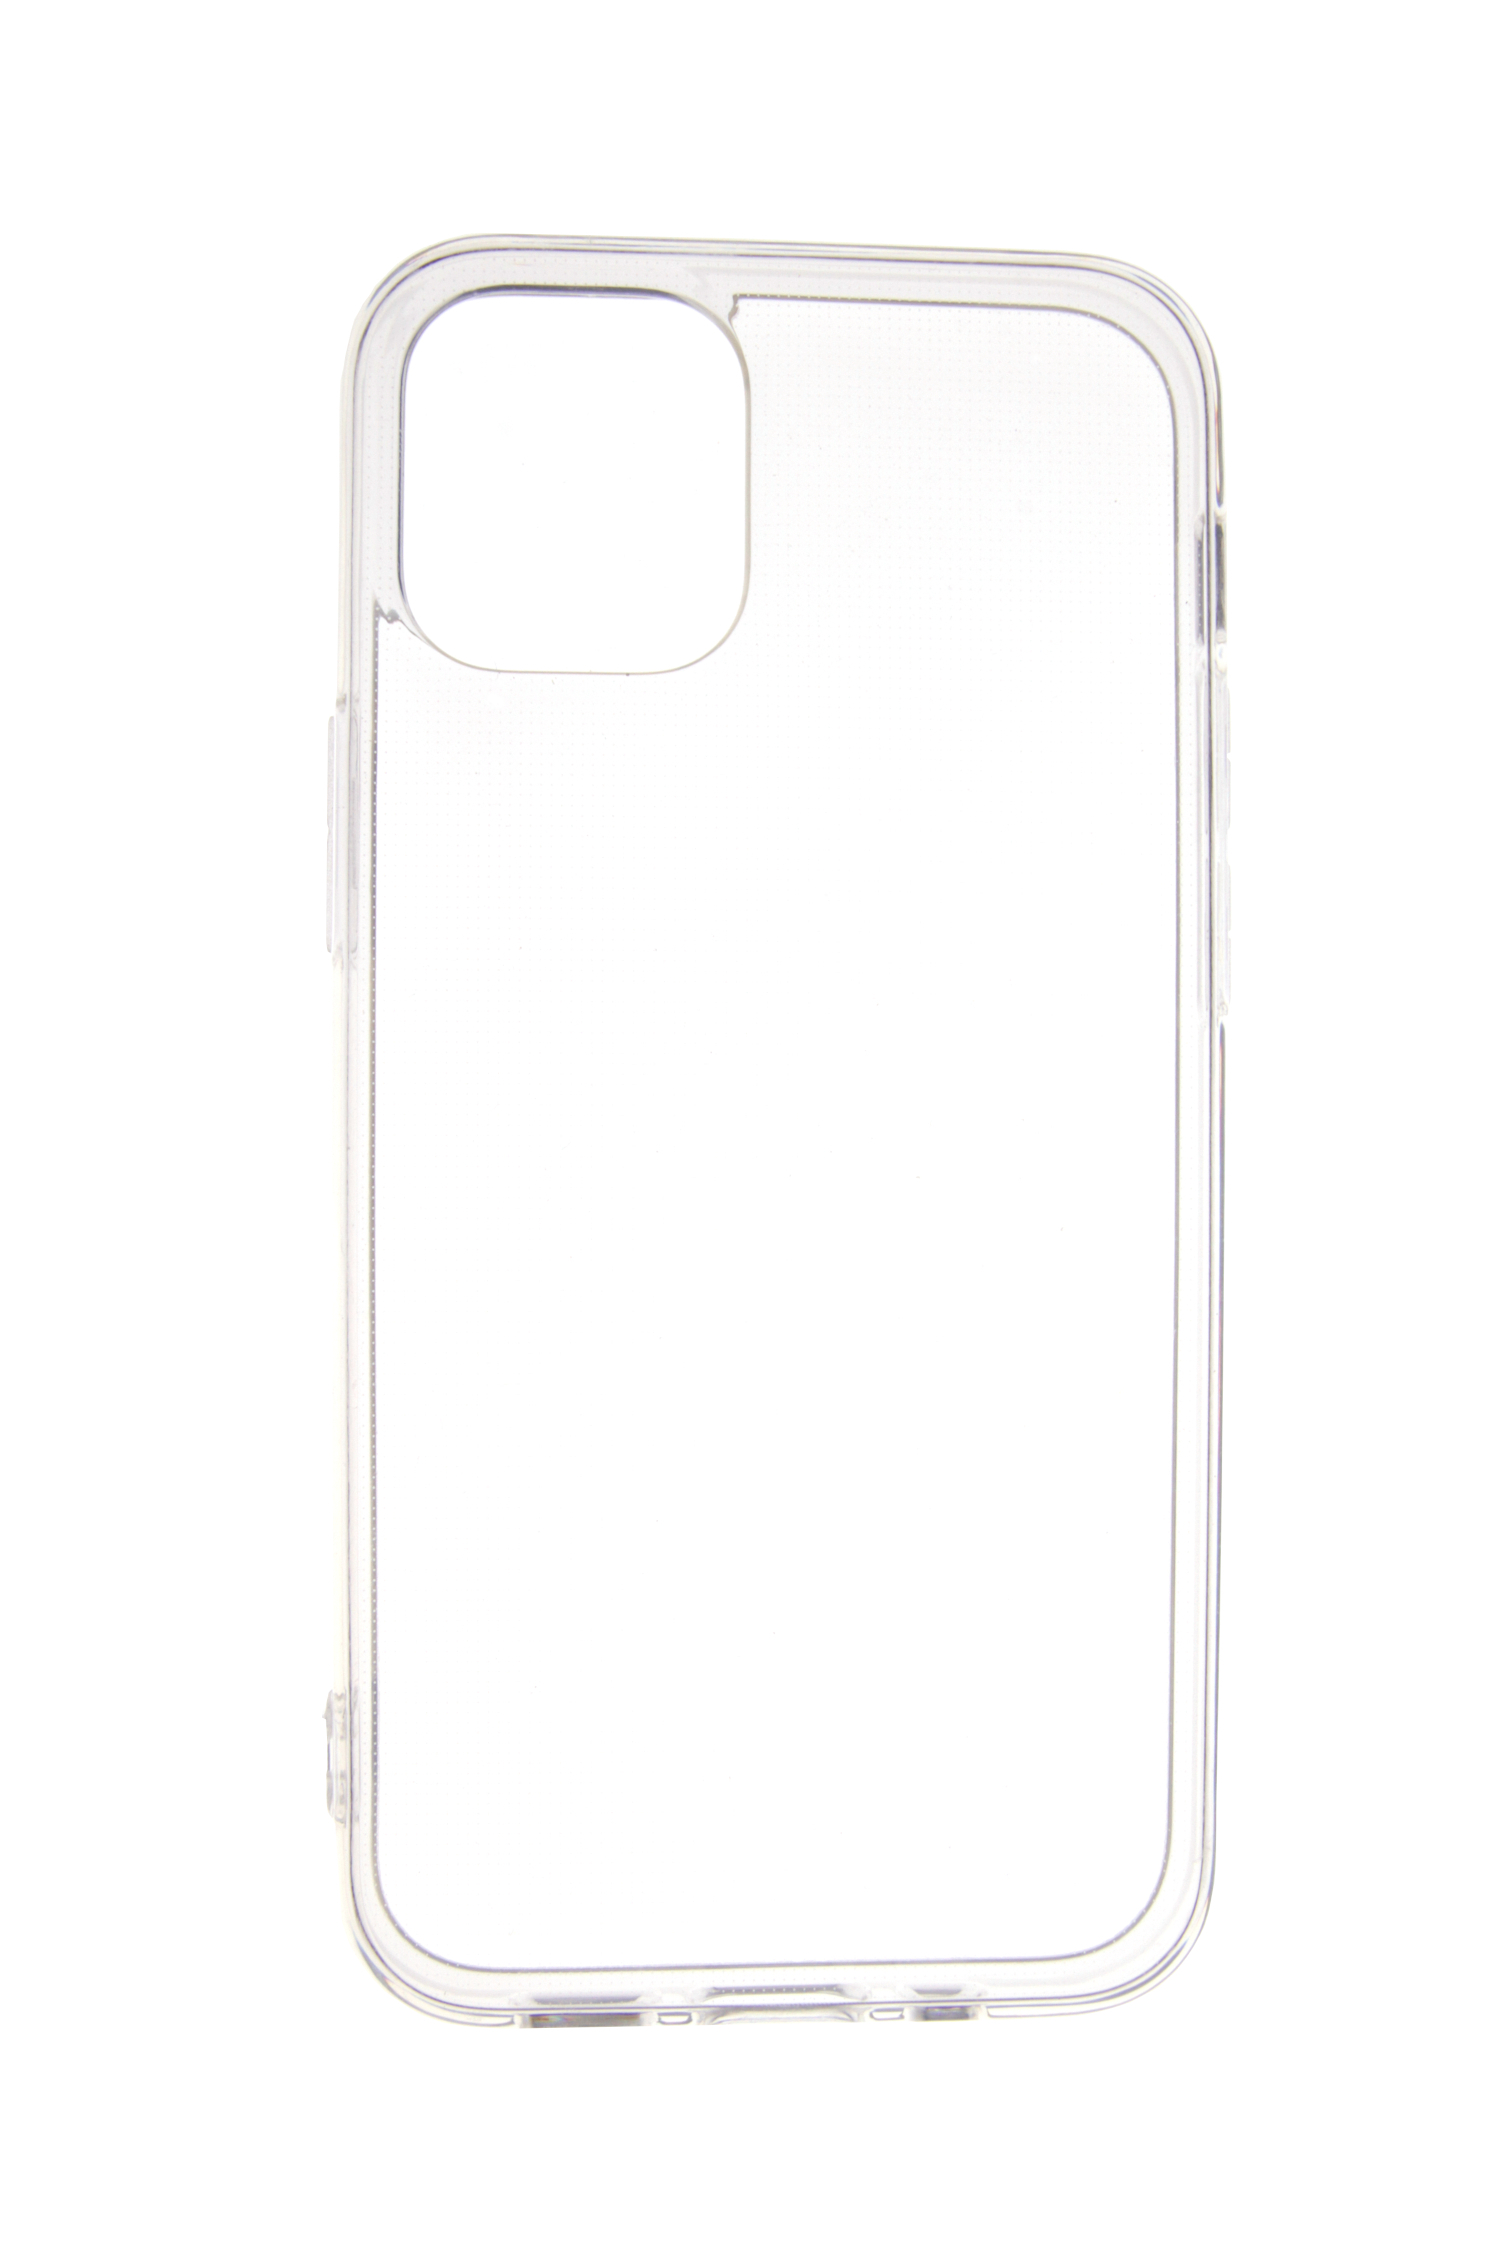 JAMCOVER 1.8 mm TPU Pro, iPhone Backcover, Case, Transparent / 12 iPhone 12 Apple